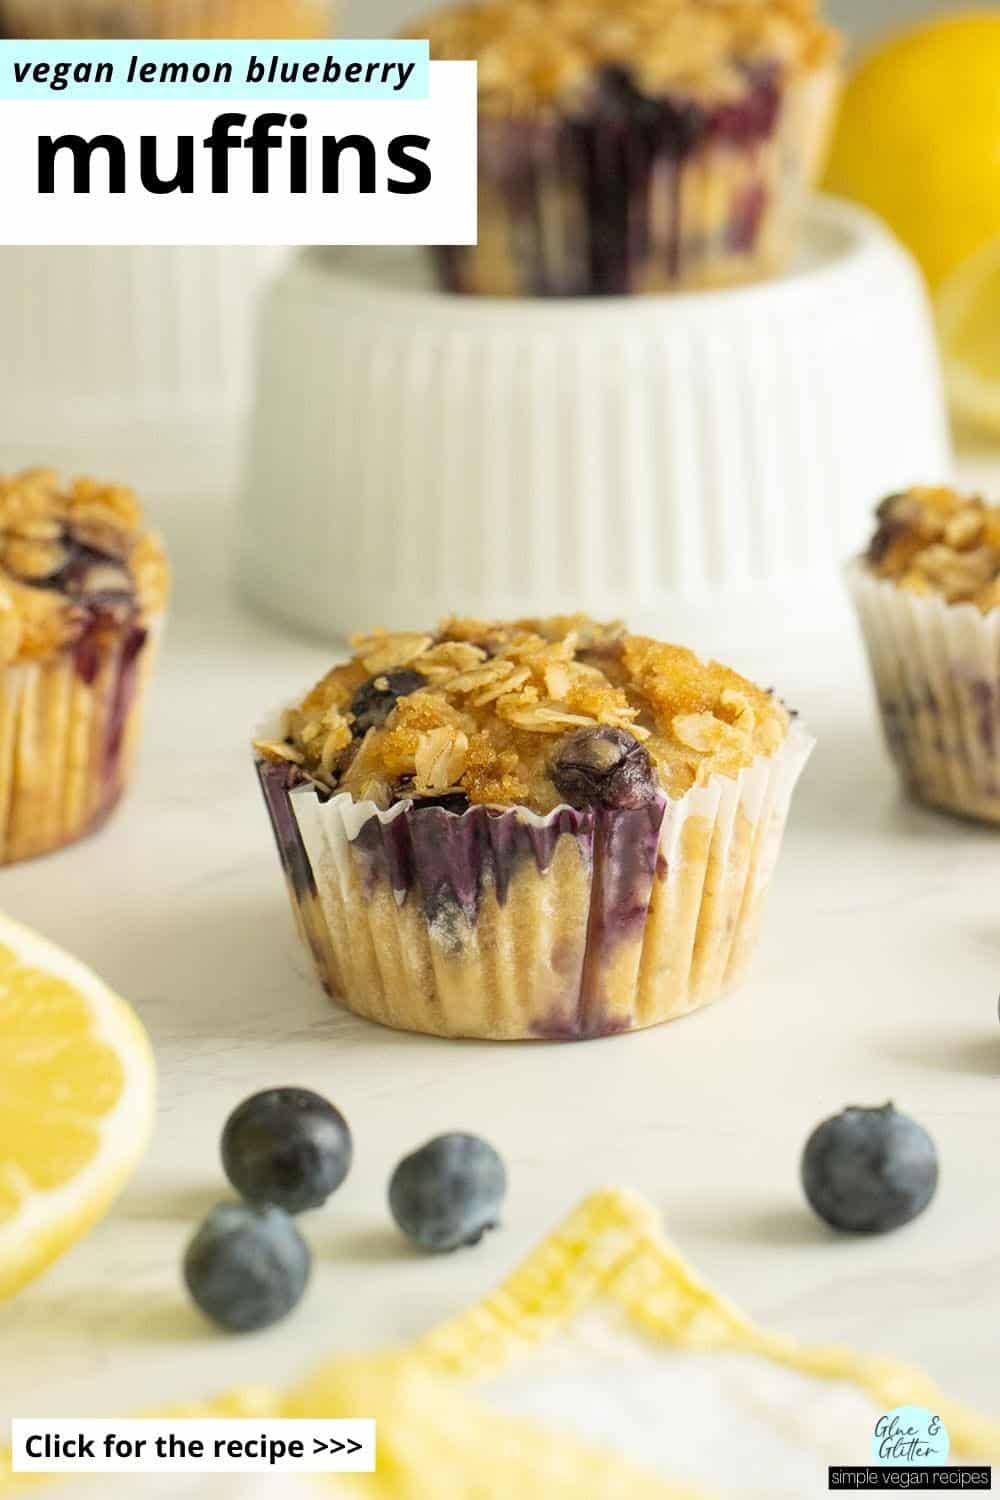 vegan lemon blueberry muffins on a white table with lemon slices and fresh blueberries, text overlay